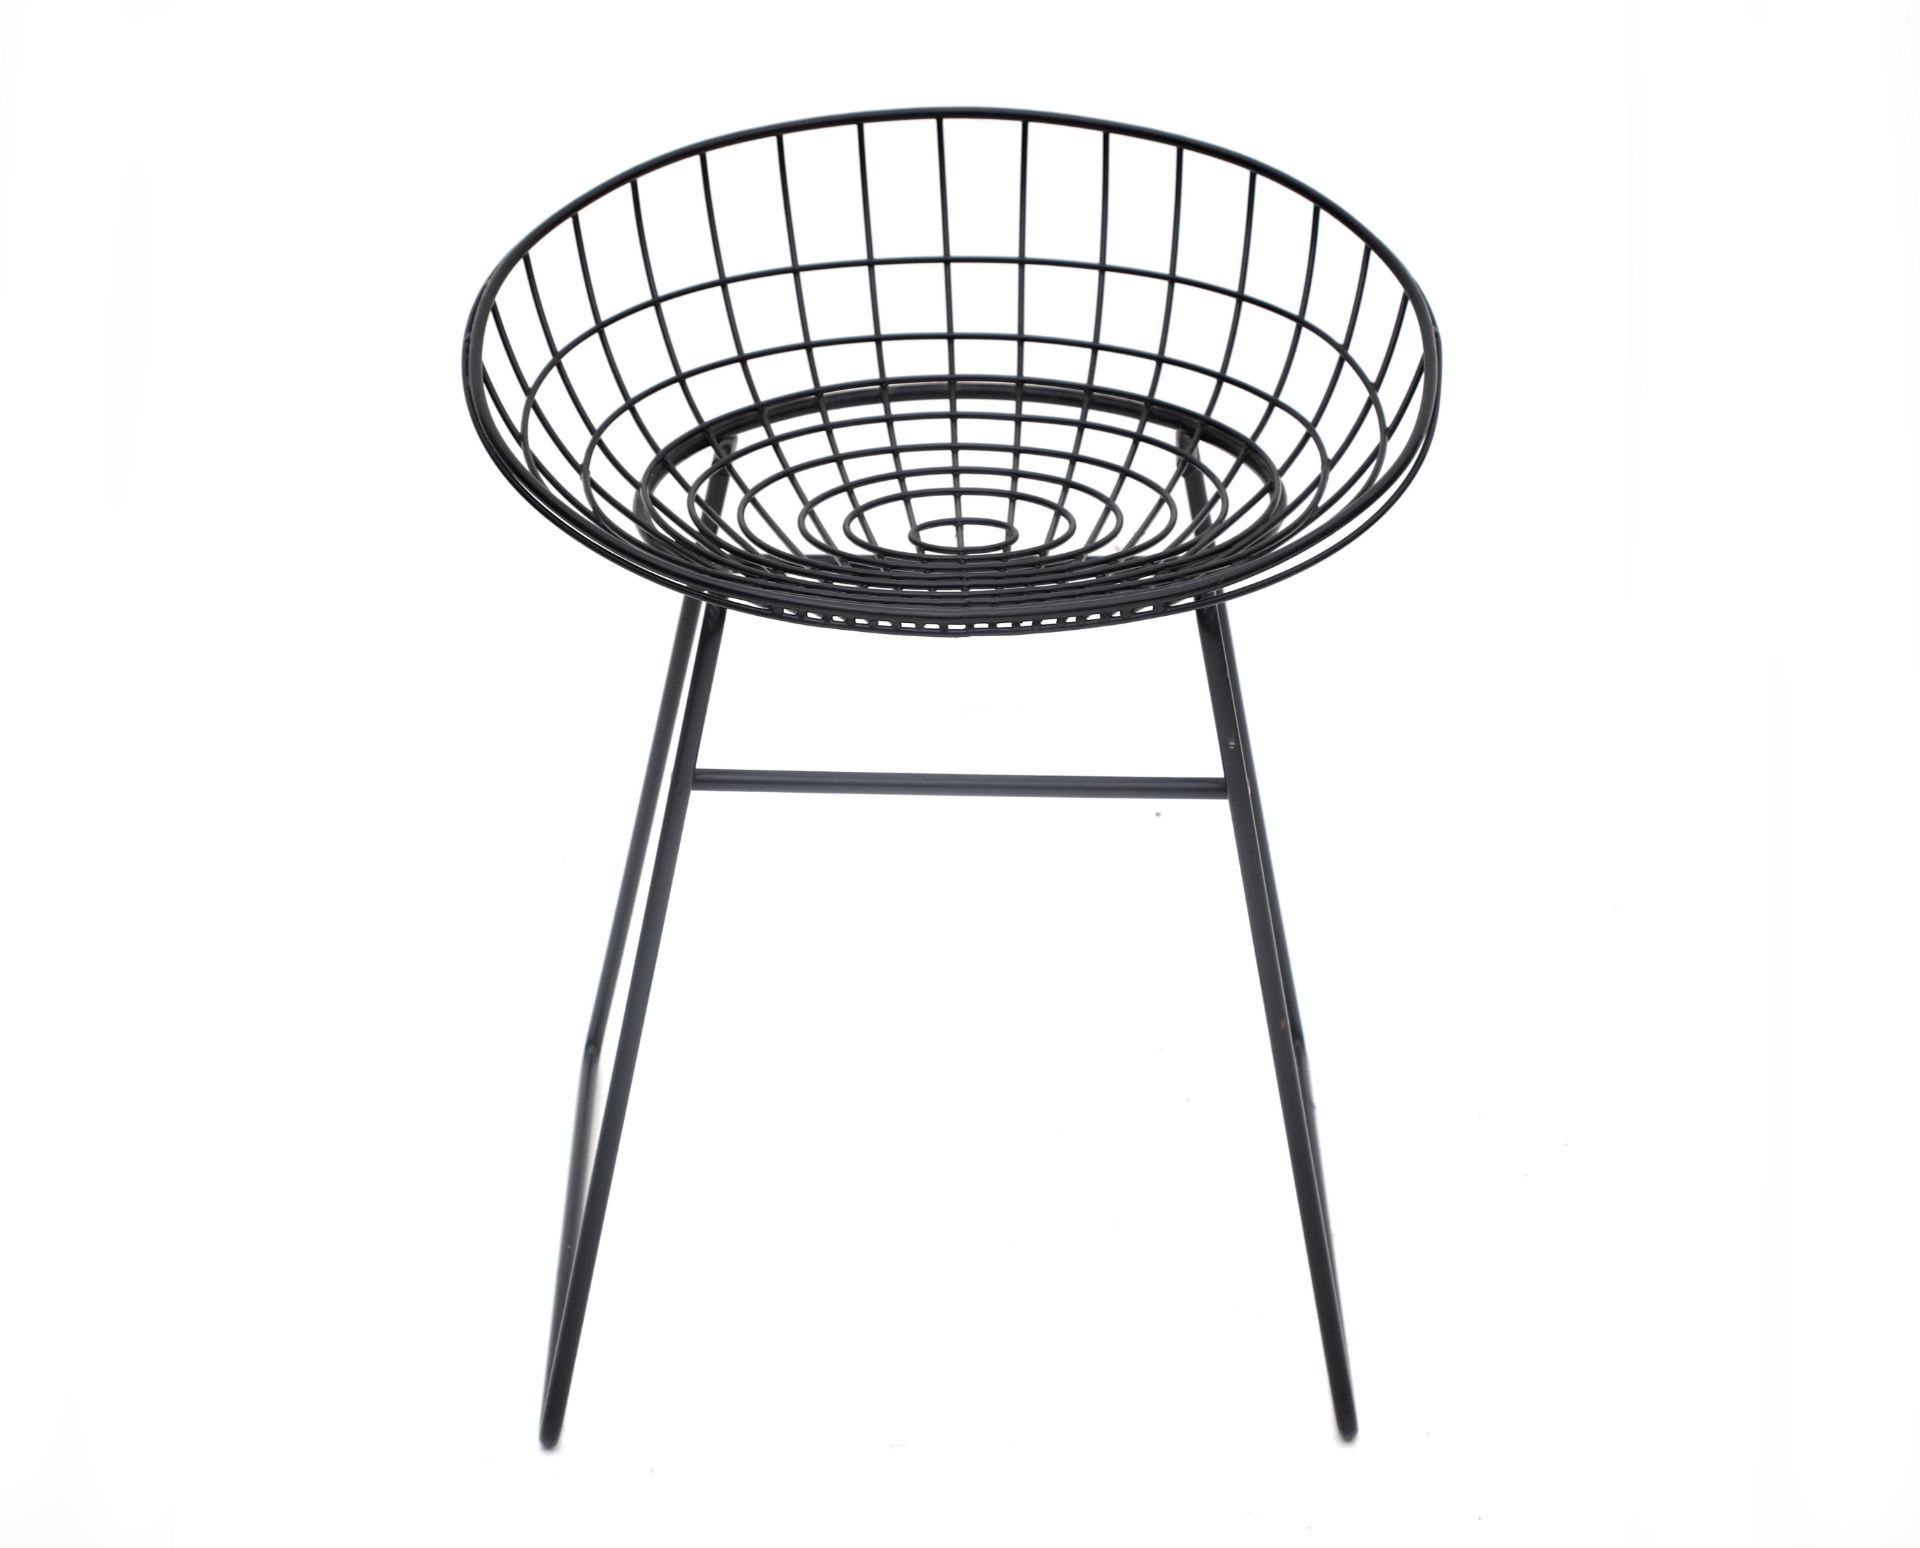 Cees Braakman (1917-1995) A black lacquered wire steel stool, model KM06, produced by Tomado for UMS